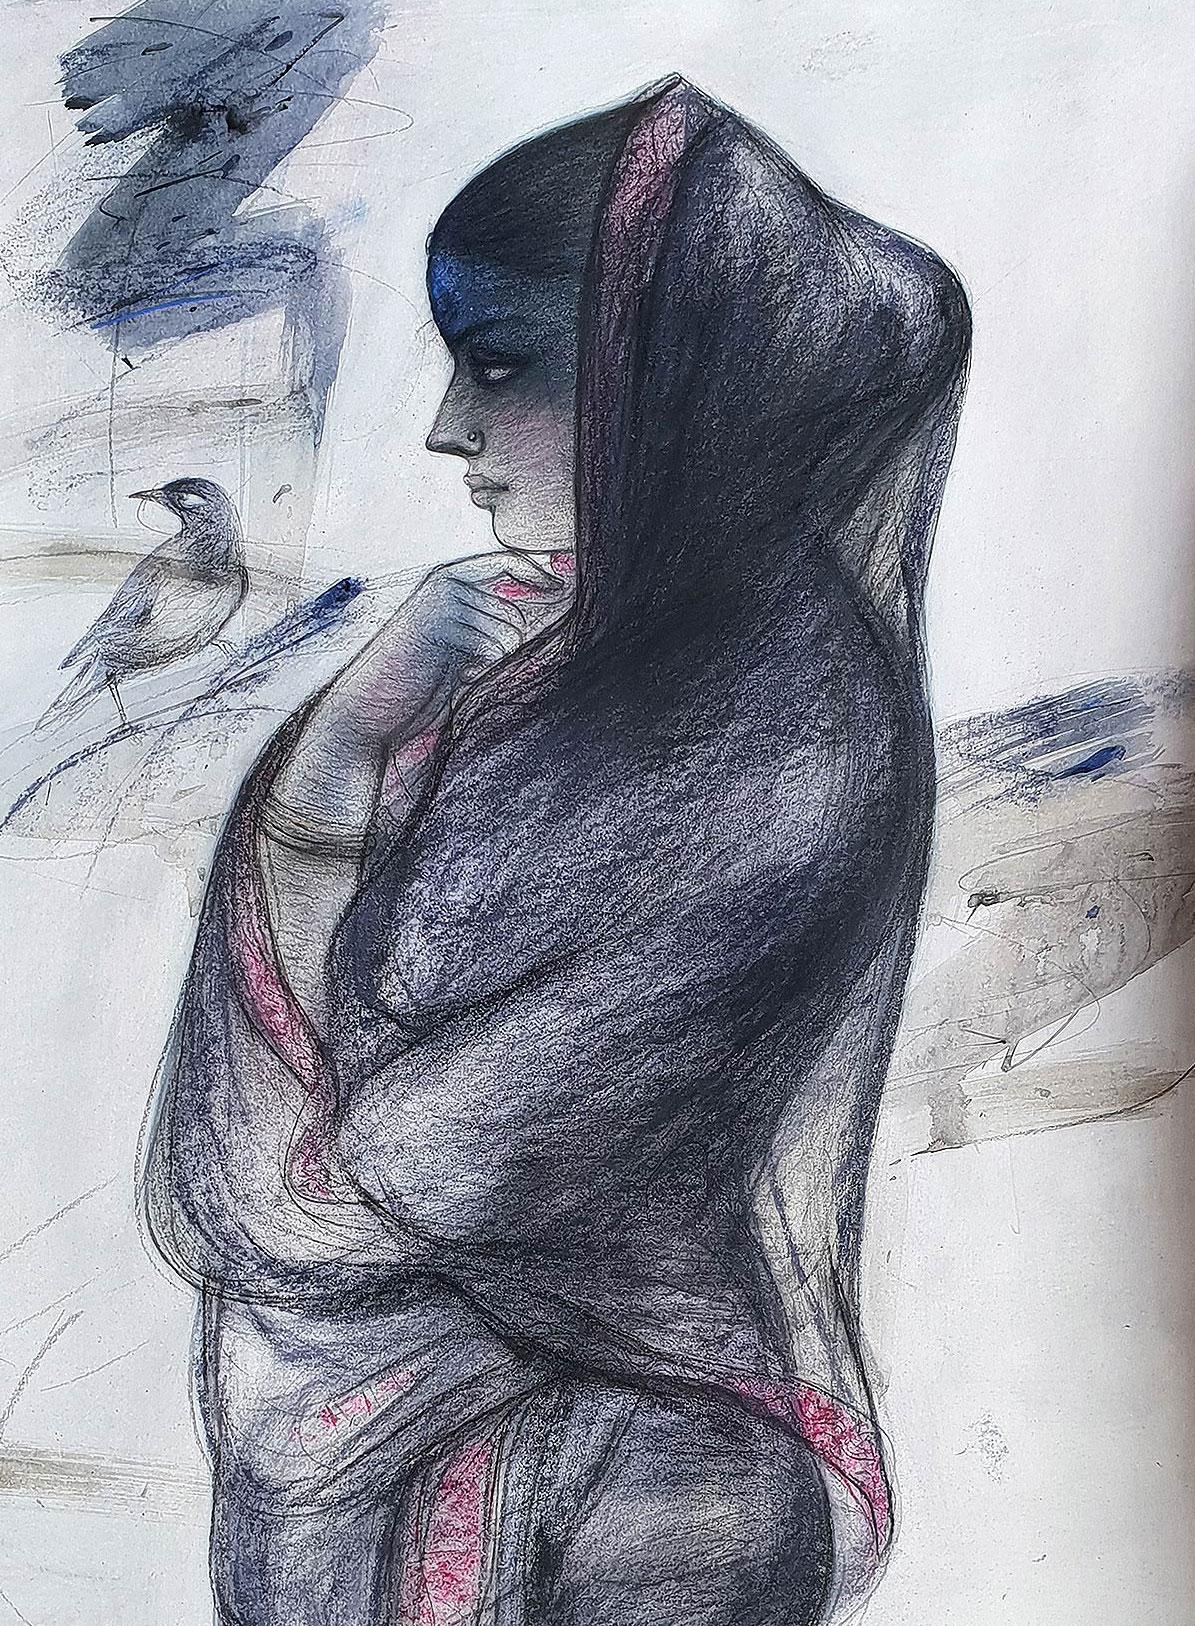 Indian Bengali Women , Charcoal, Pastel on Paper, Blue, Black, Red 